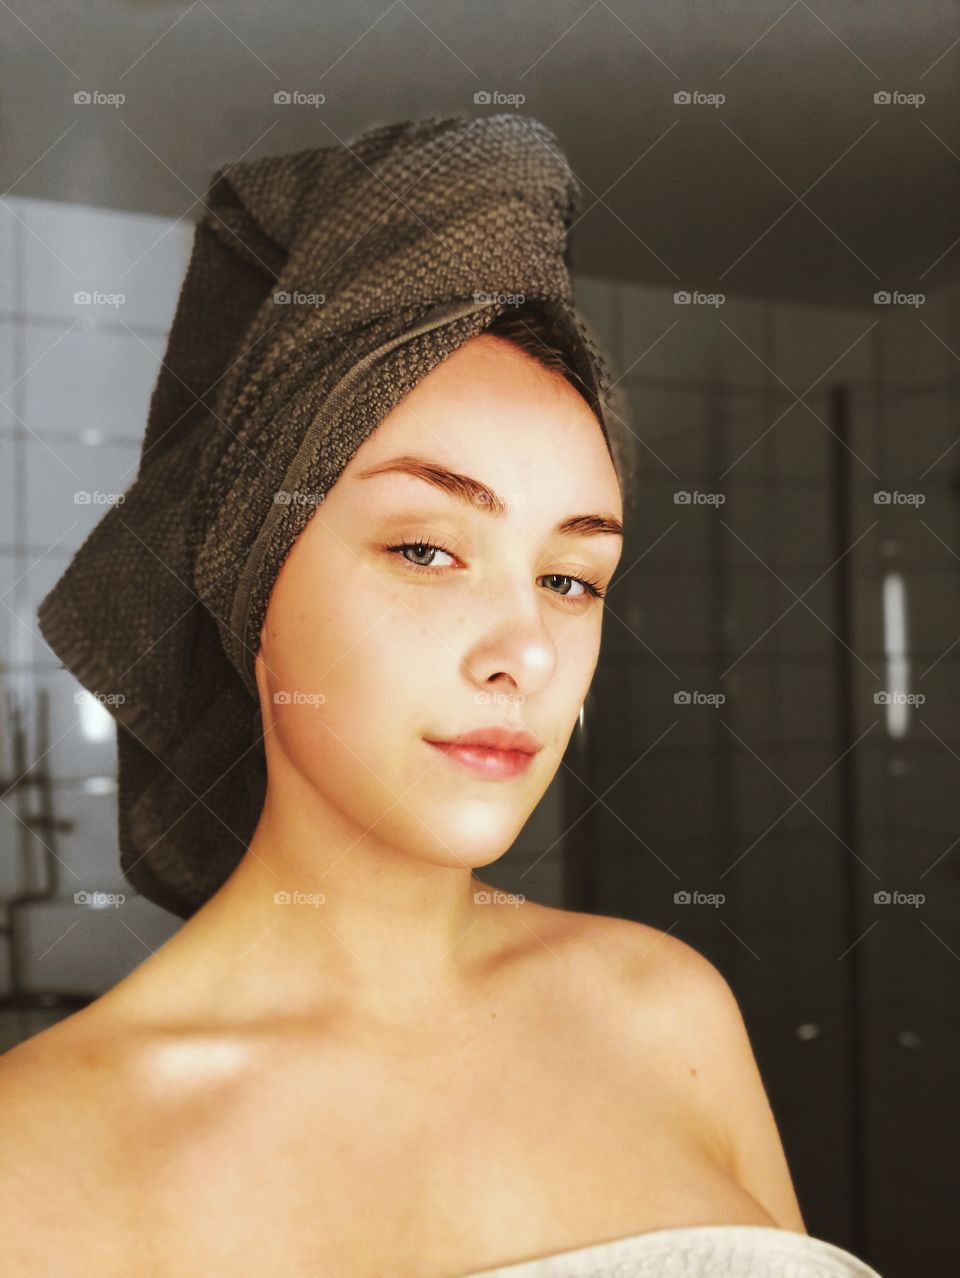 Shower selfie//  I do not have paypal so if you want to buy the photo just contact me :)